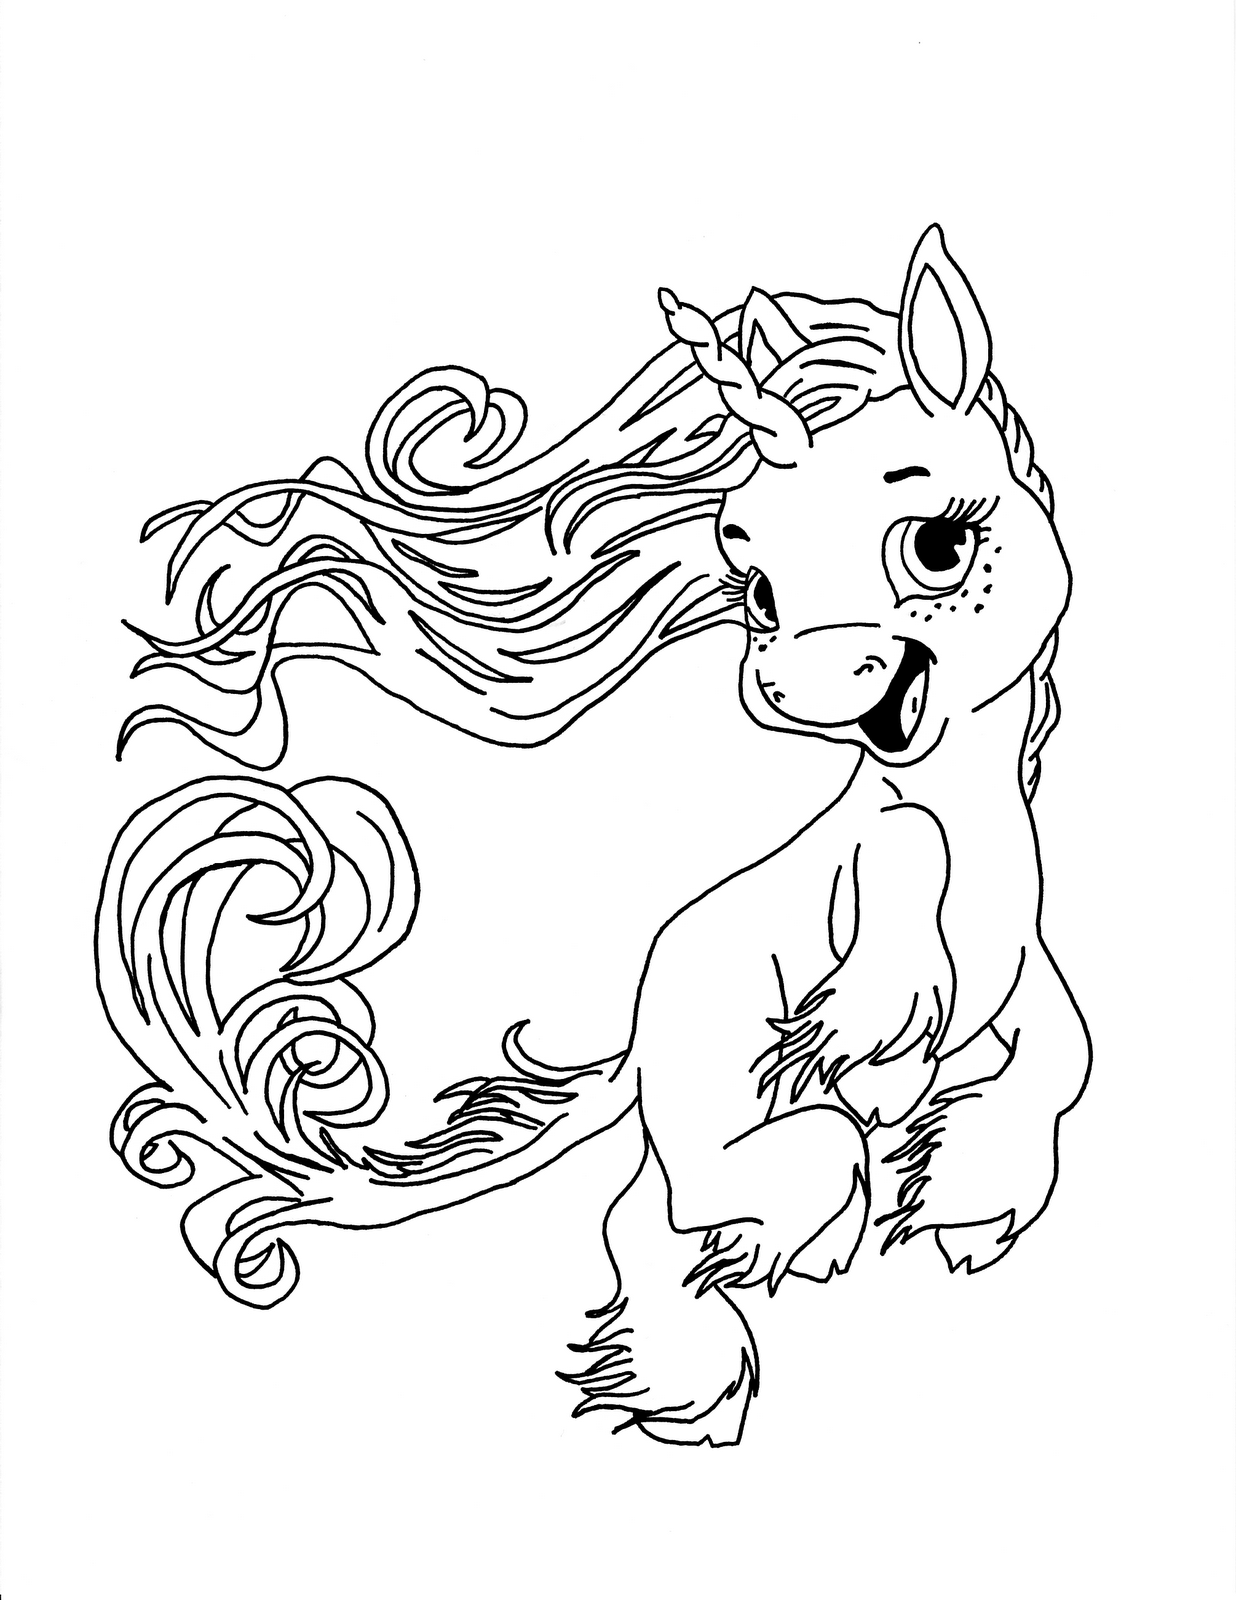 realistic-unicorn-coloring-pages-for-kids-select-from-35563-printable-coloring-pages-of